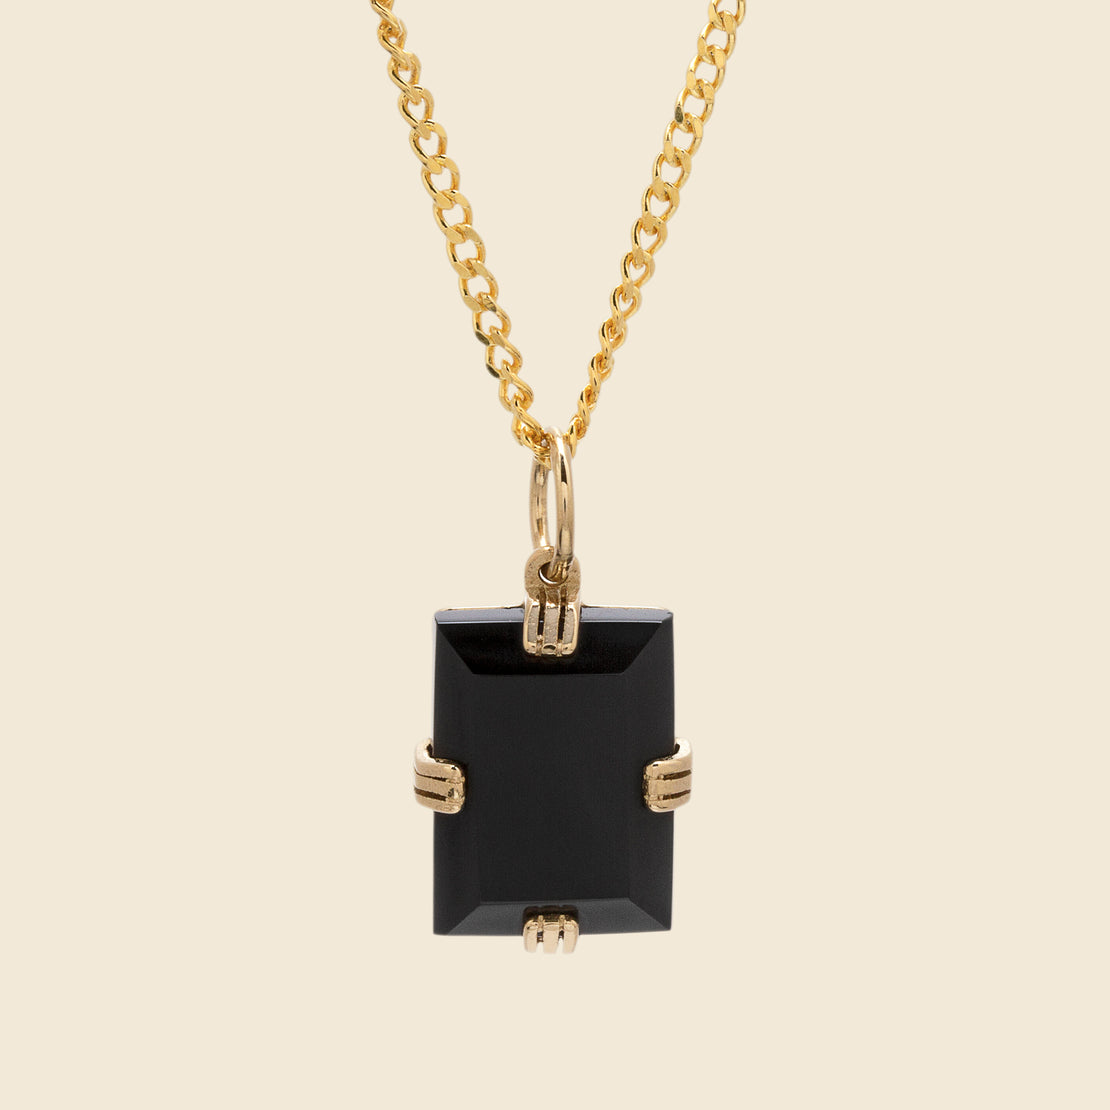 Petite Piazza Necklace in Gold with Onyx – DelBrenna